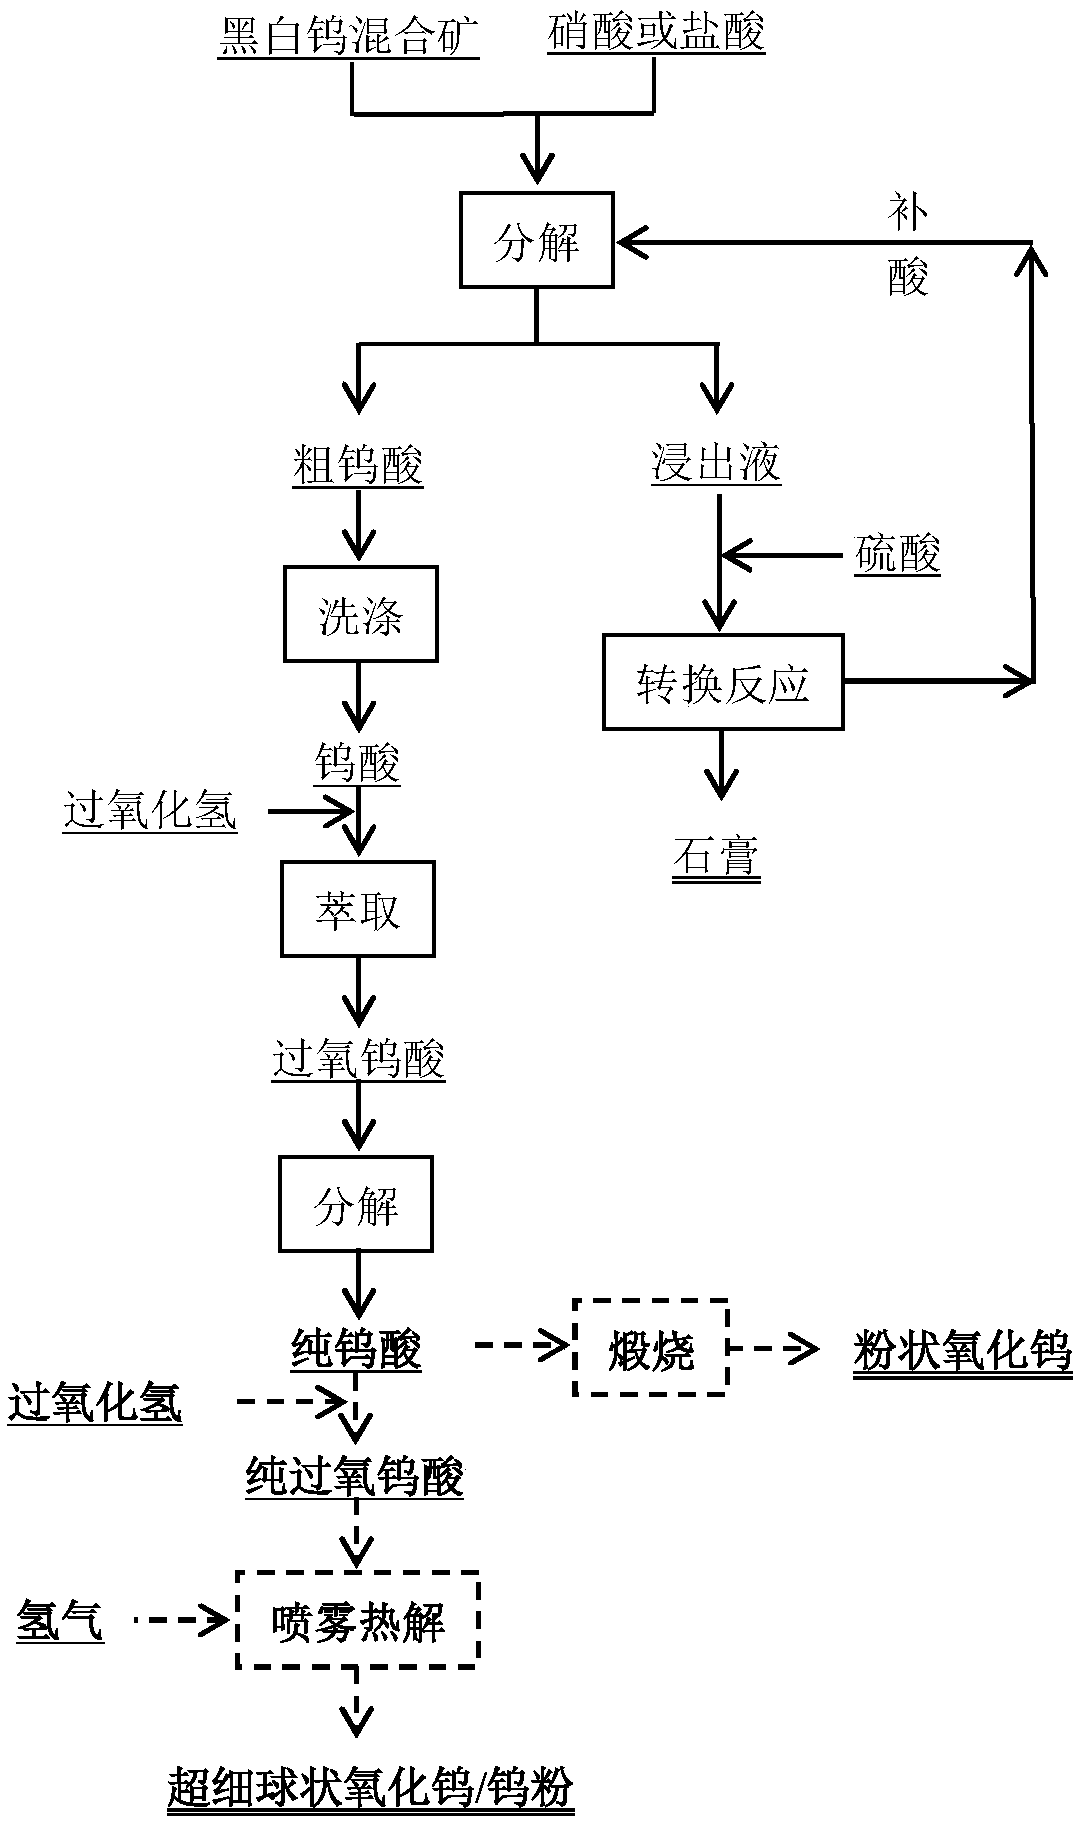 Method for carrying out acid decomposition on wolframite-scheelite mixed ore to prepare tungsten oxide and tungsten powder